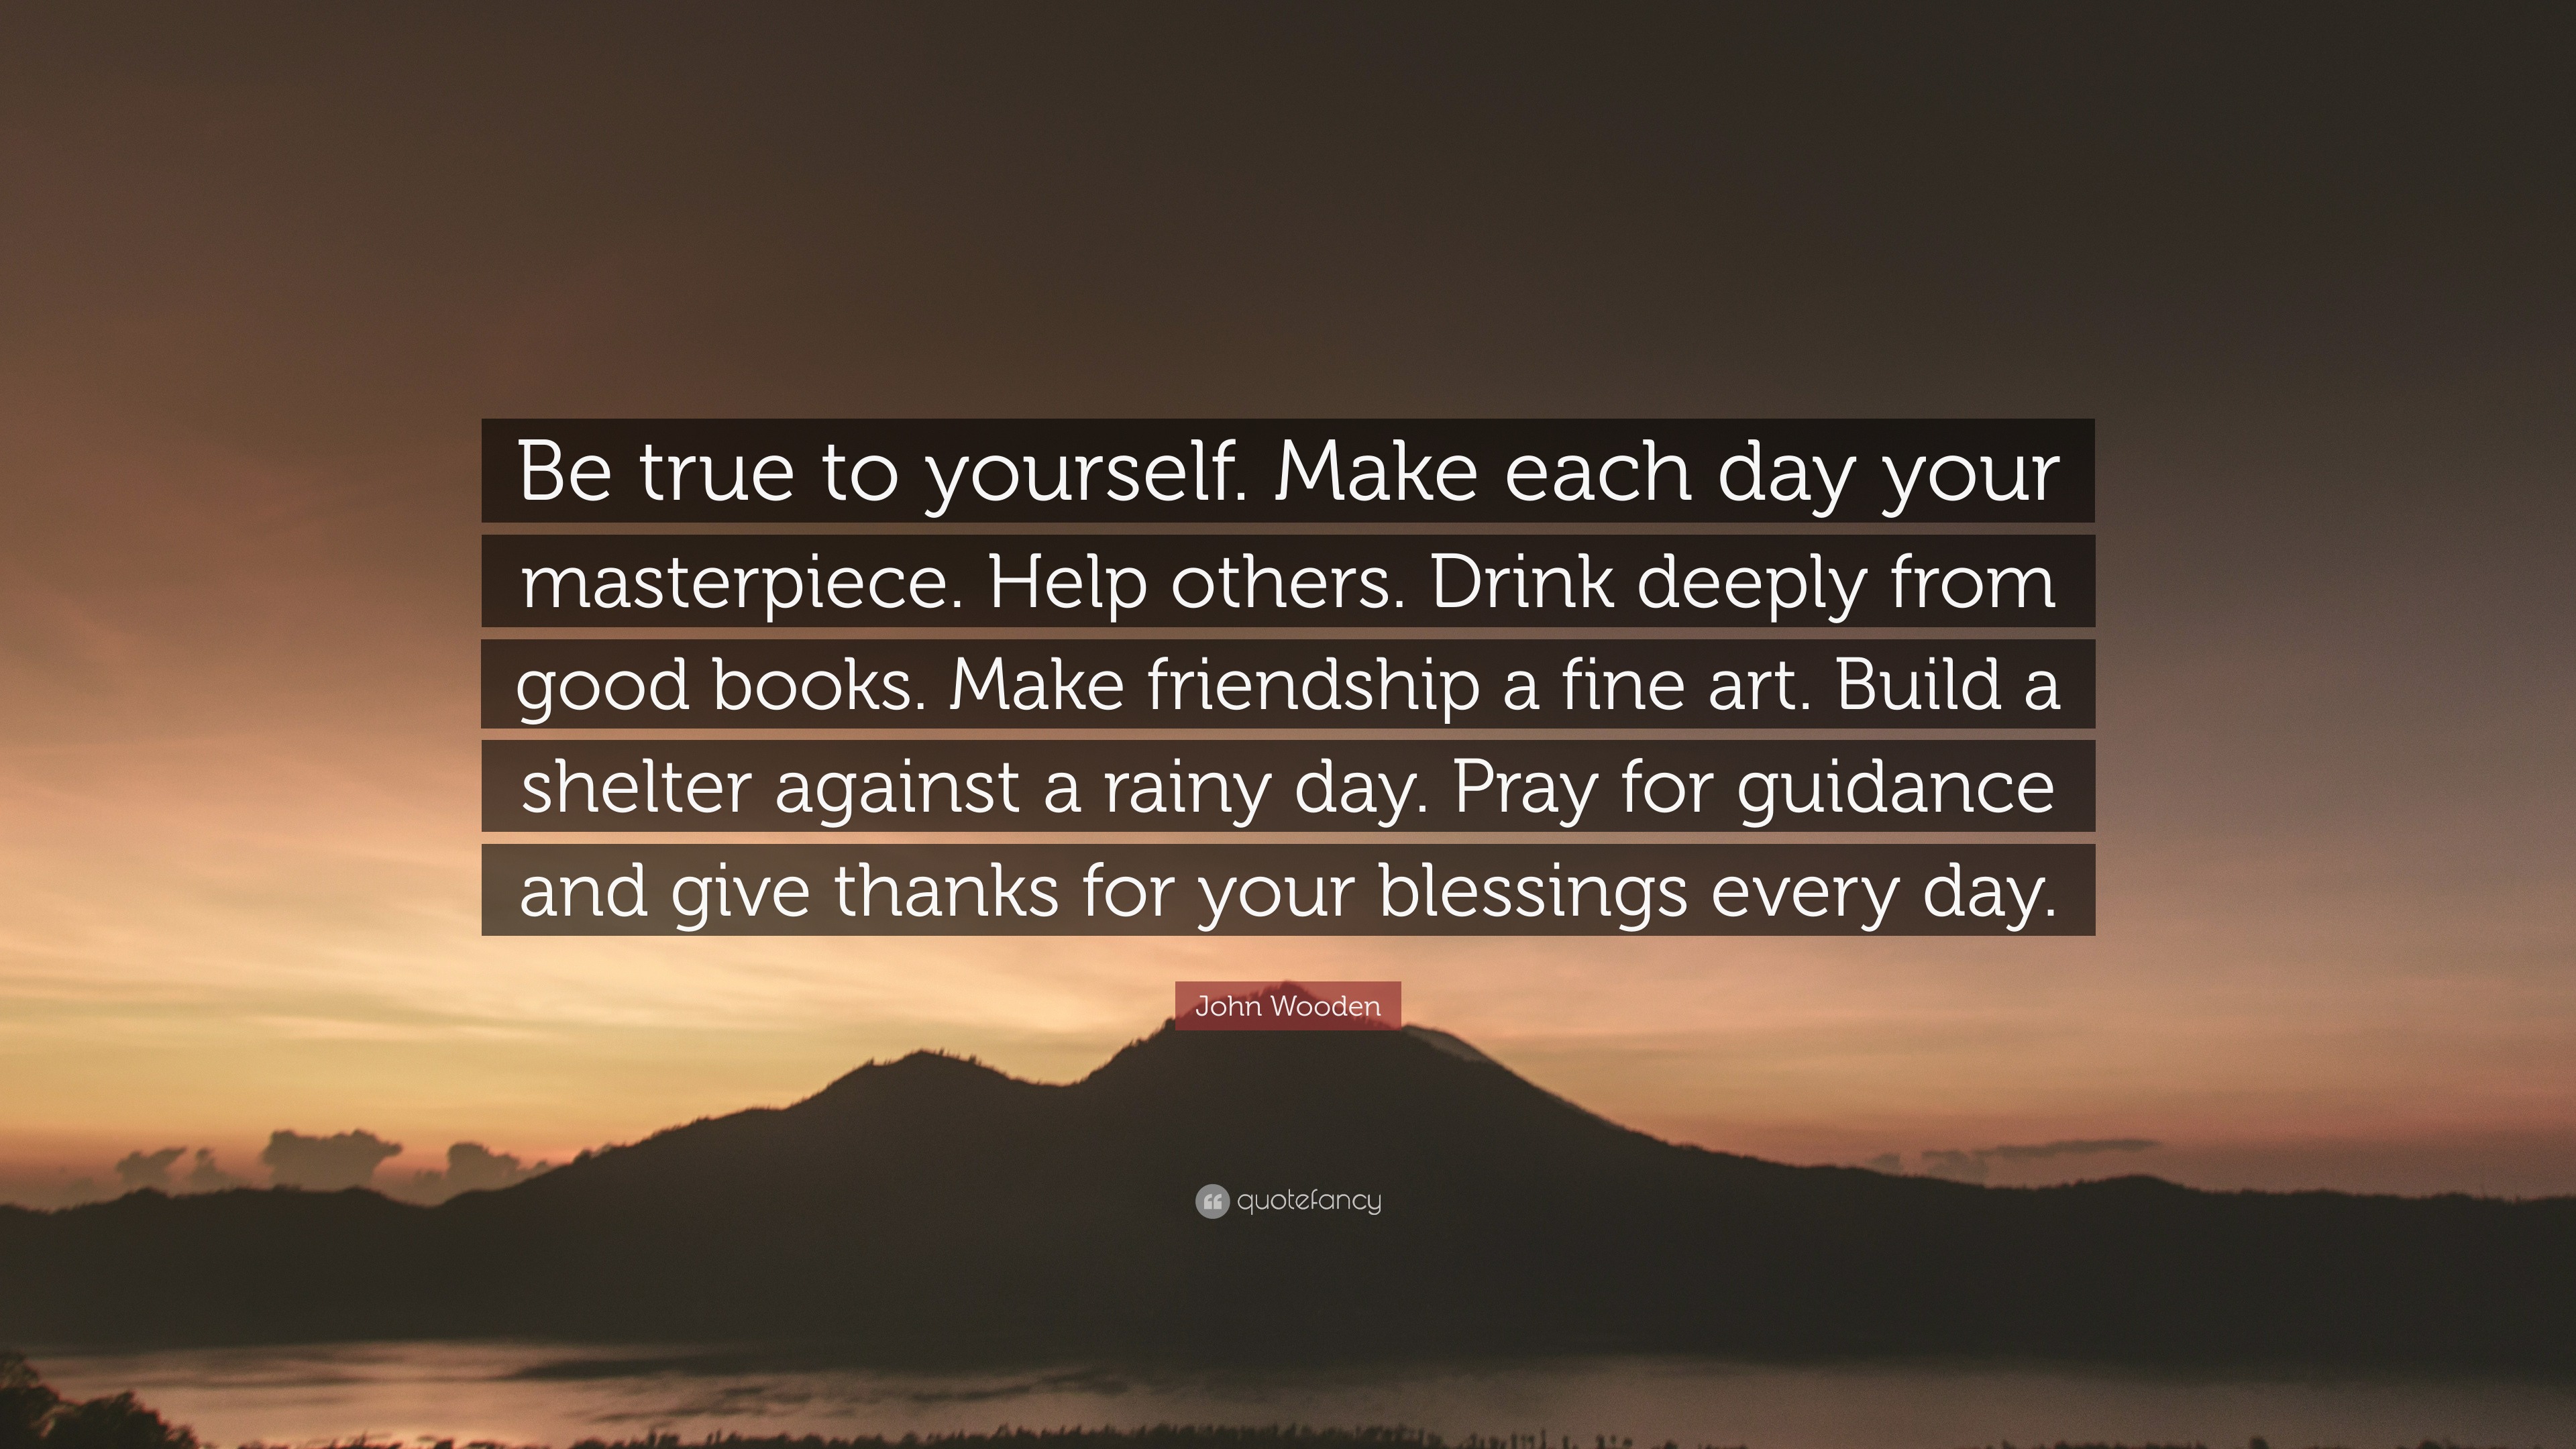 John Wooden Quote “Be true to yourself. Make each day